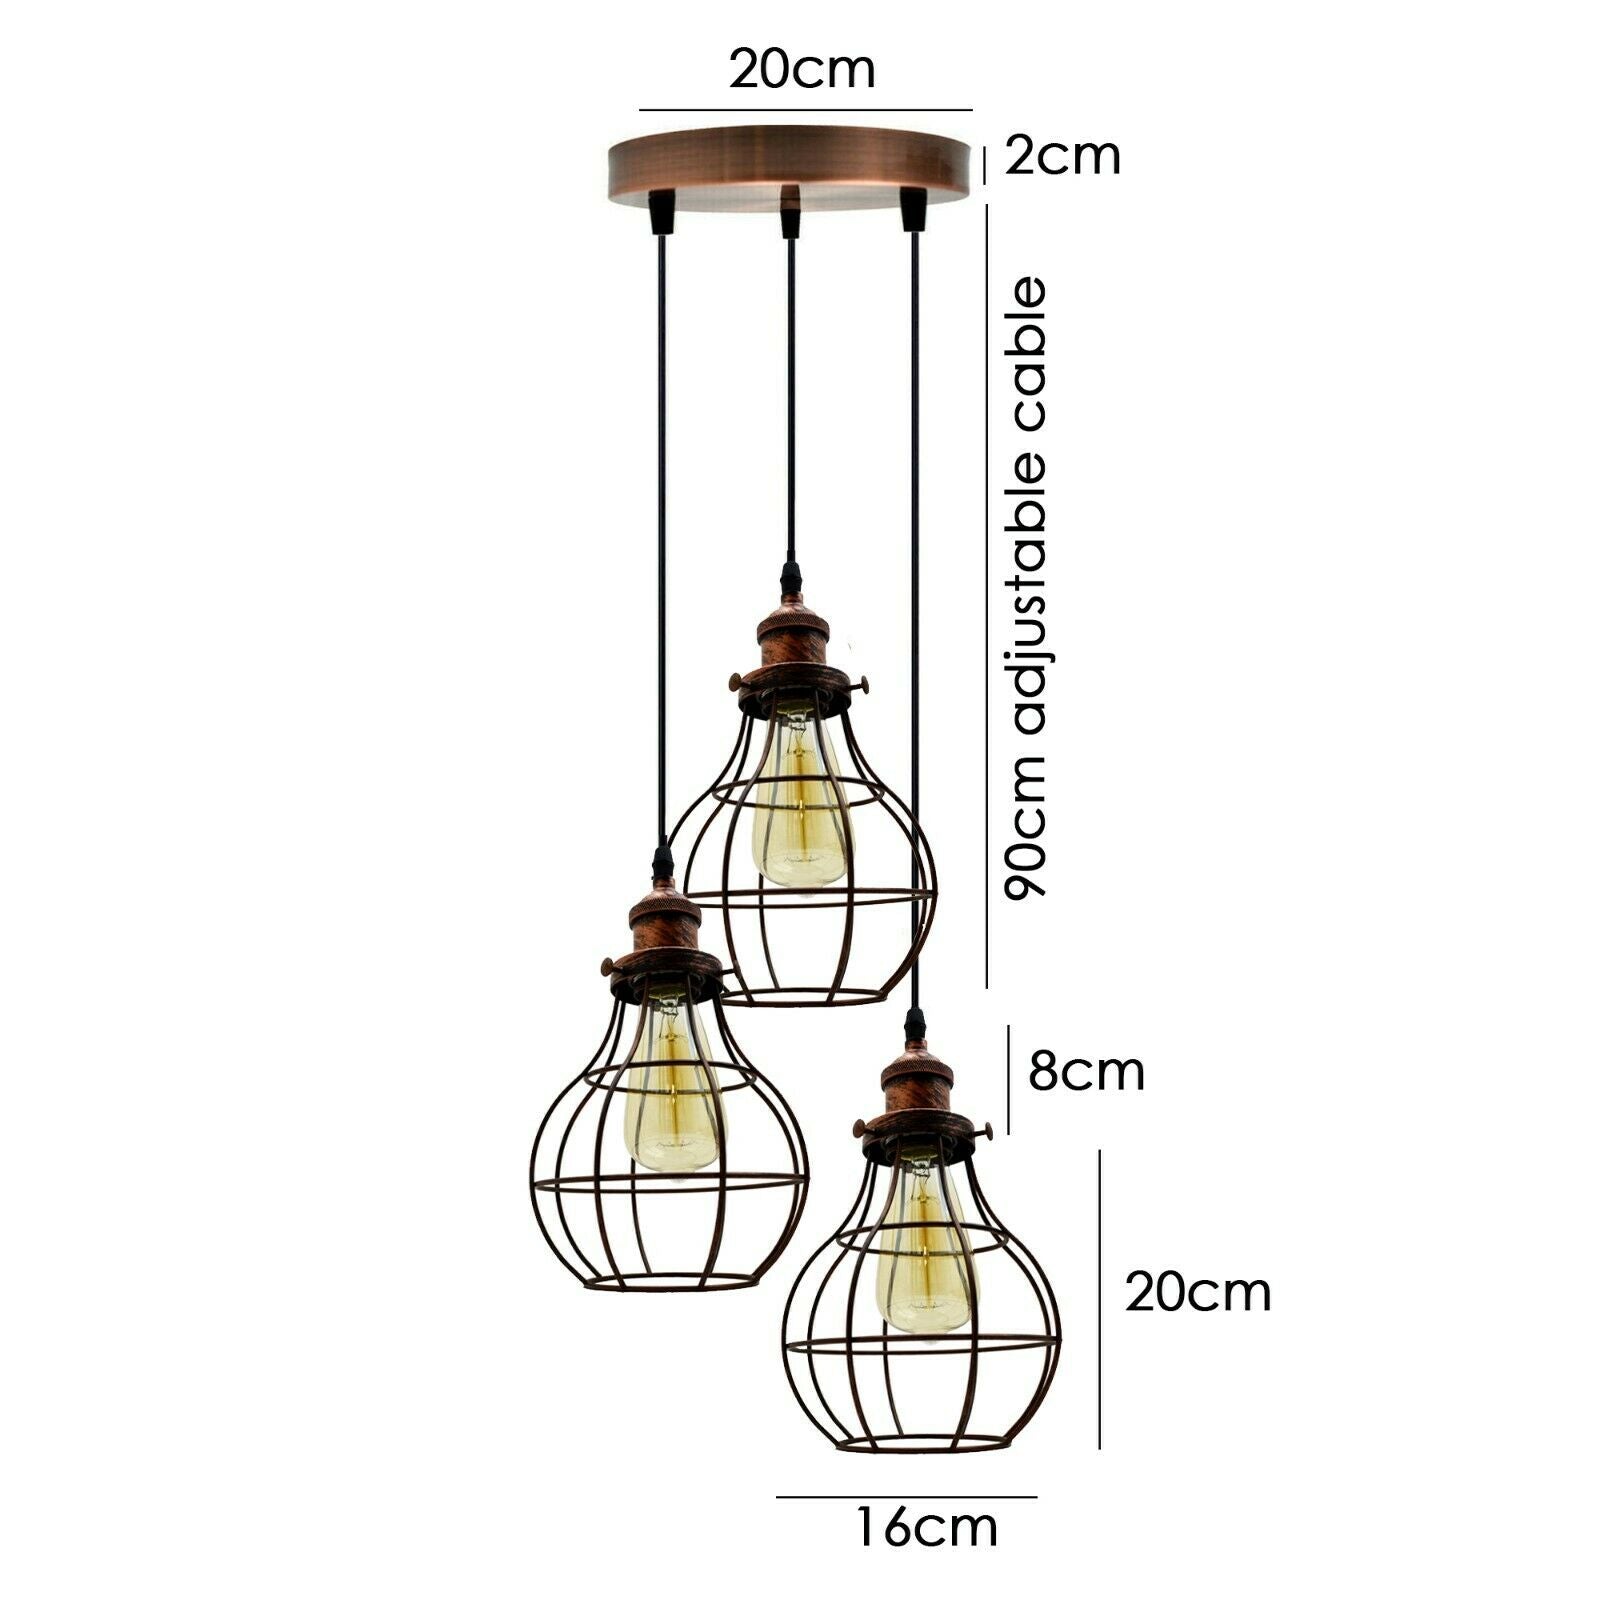 3 Way Ceiling Pendant Cage Cluster Light Fitting -  Products length 